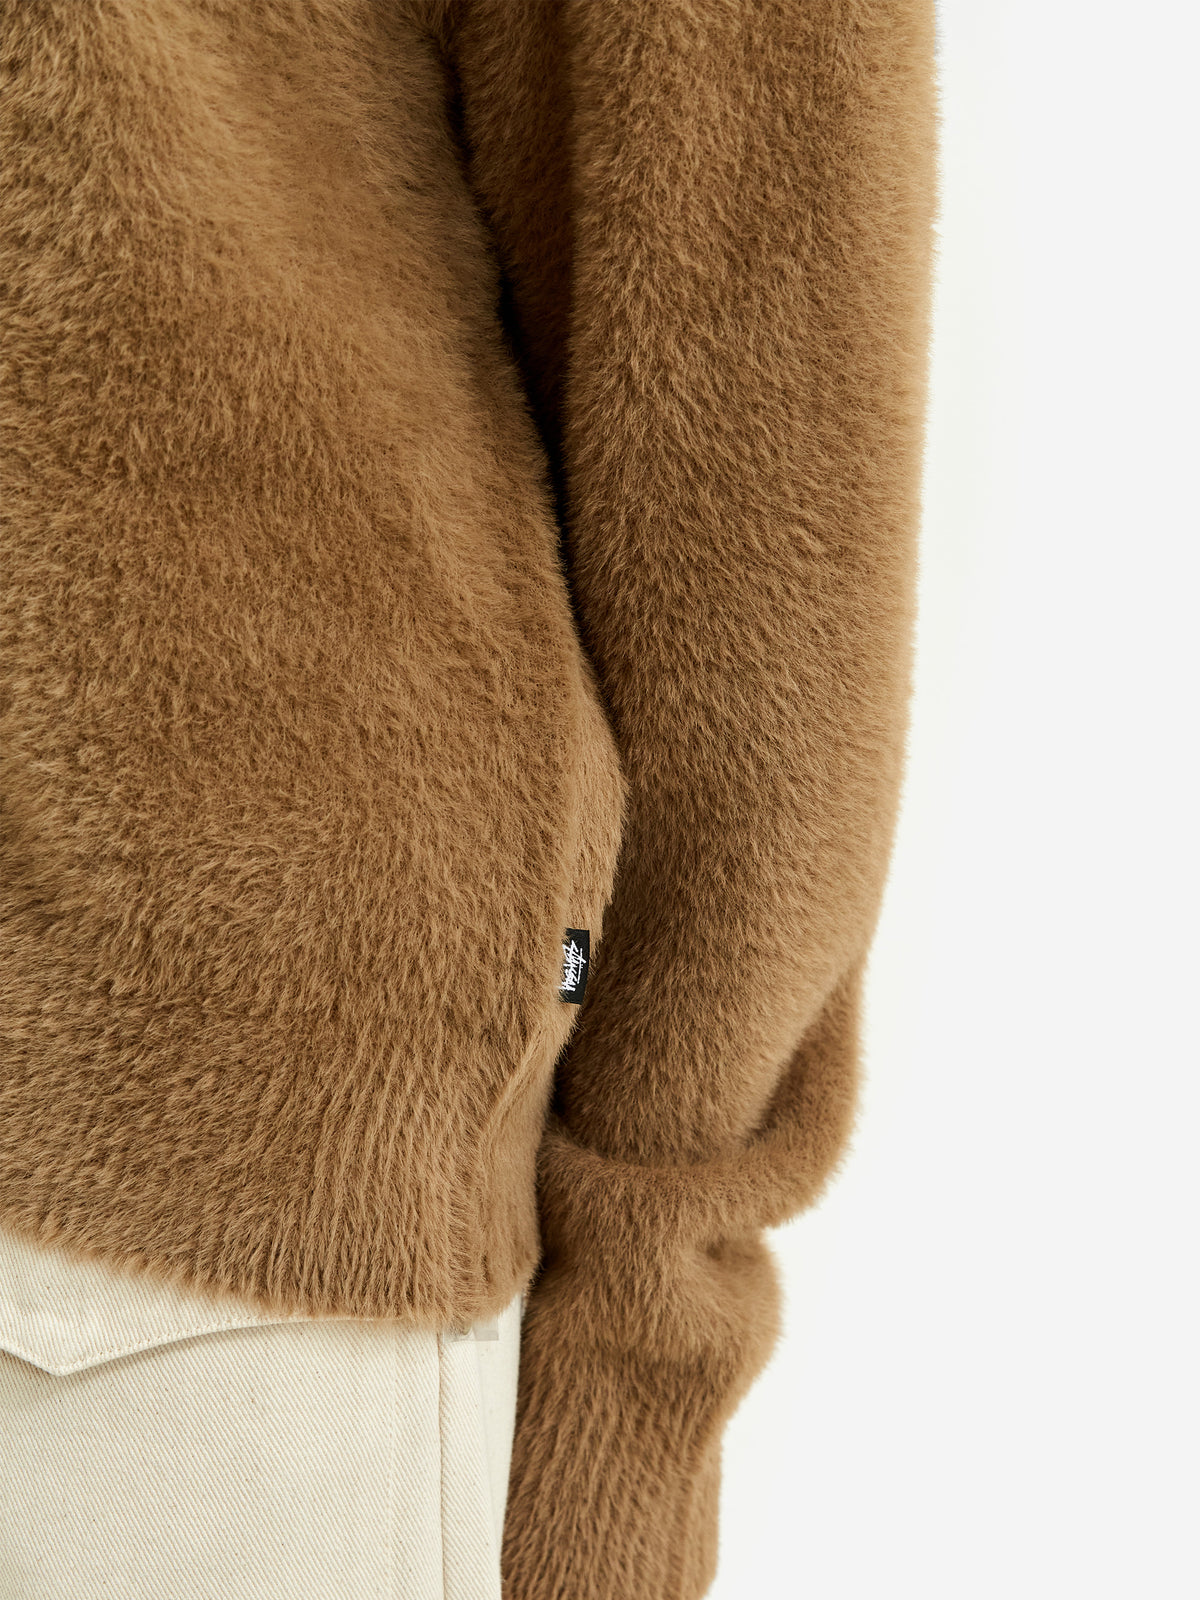 The Stussy Shaggy Cardigan W - Taupe Stussy is sold at the lowest